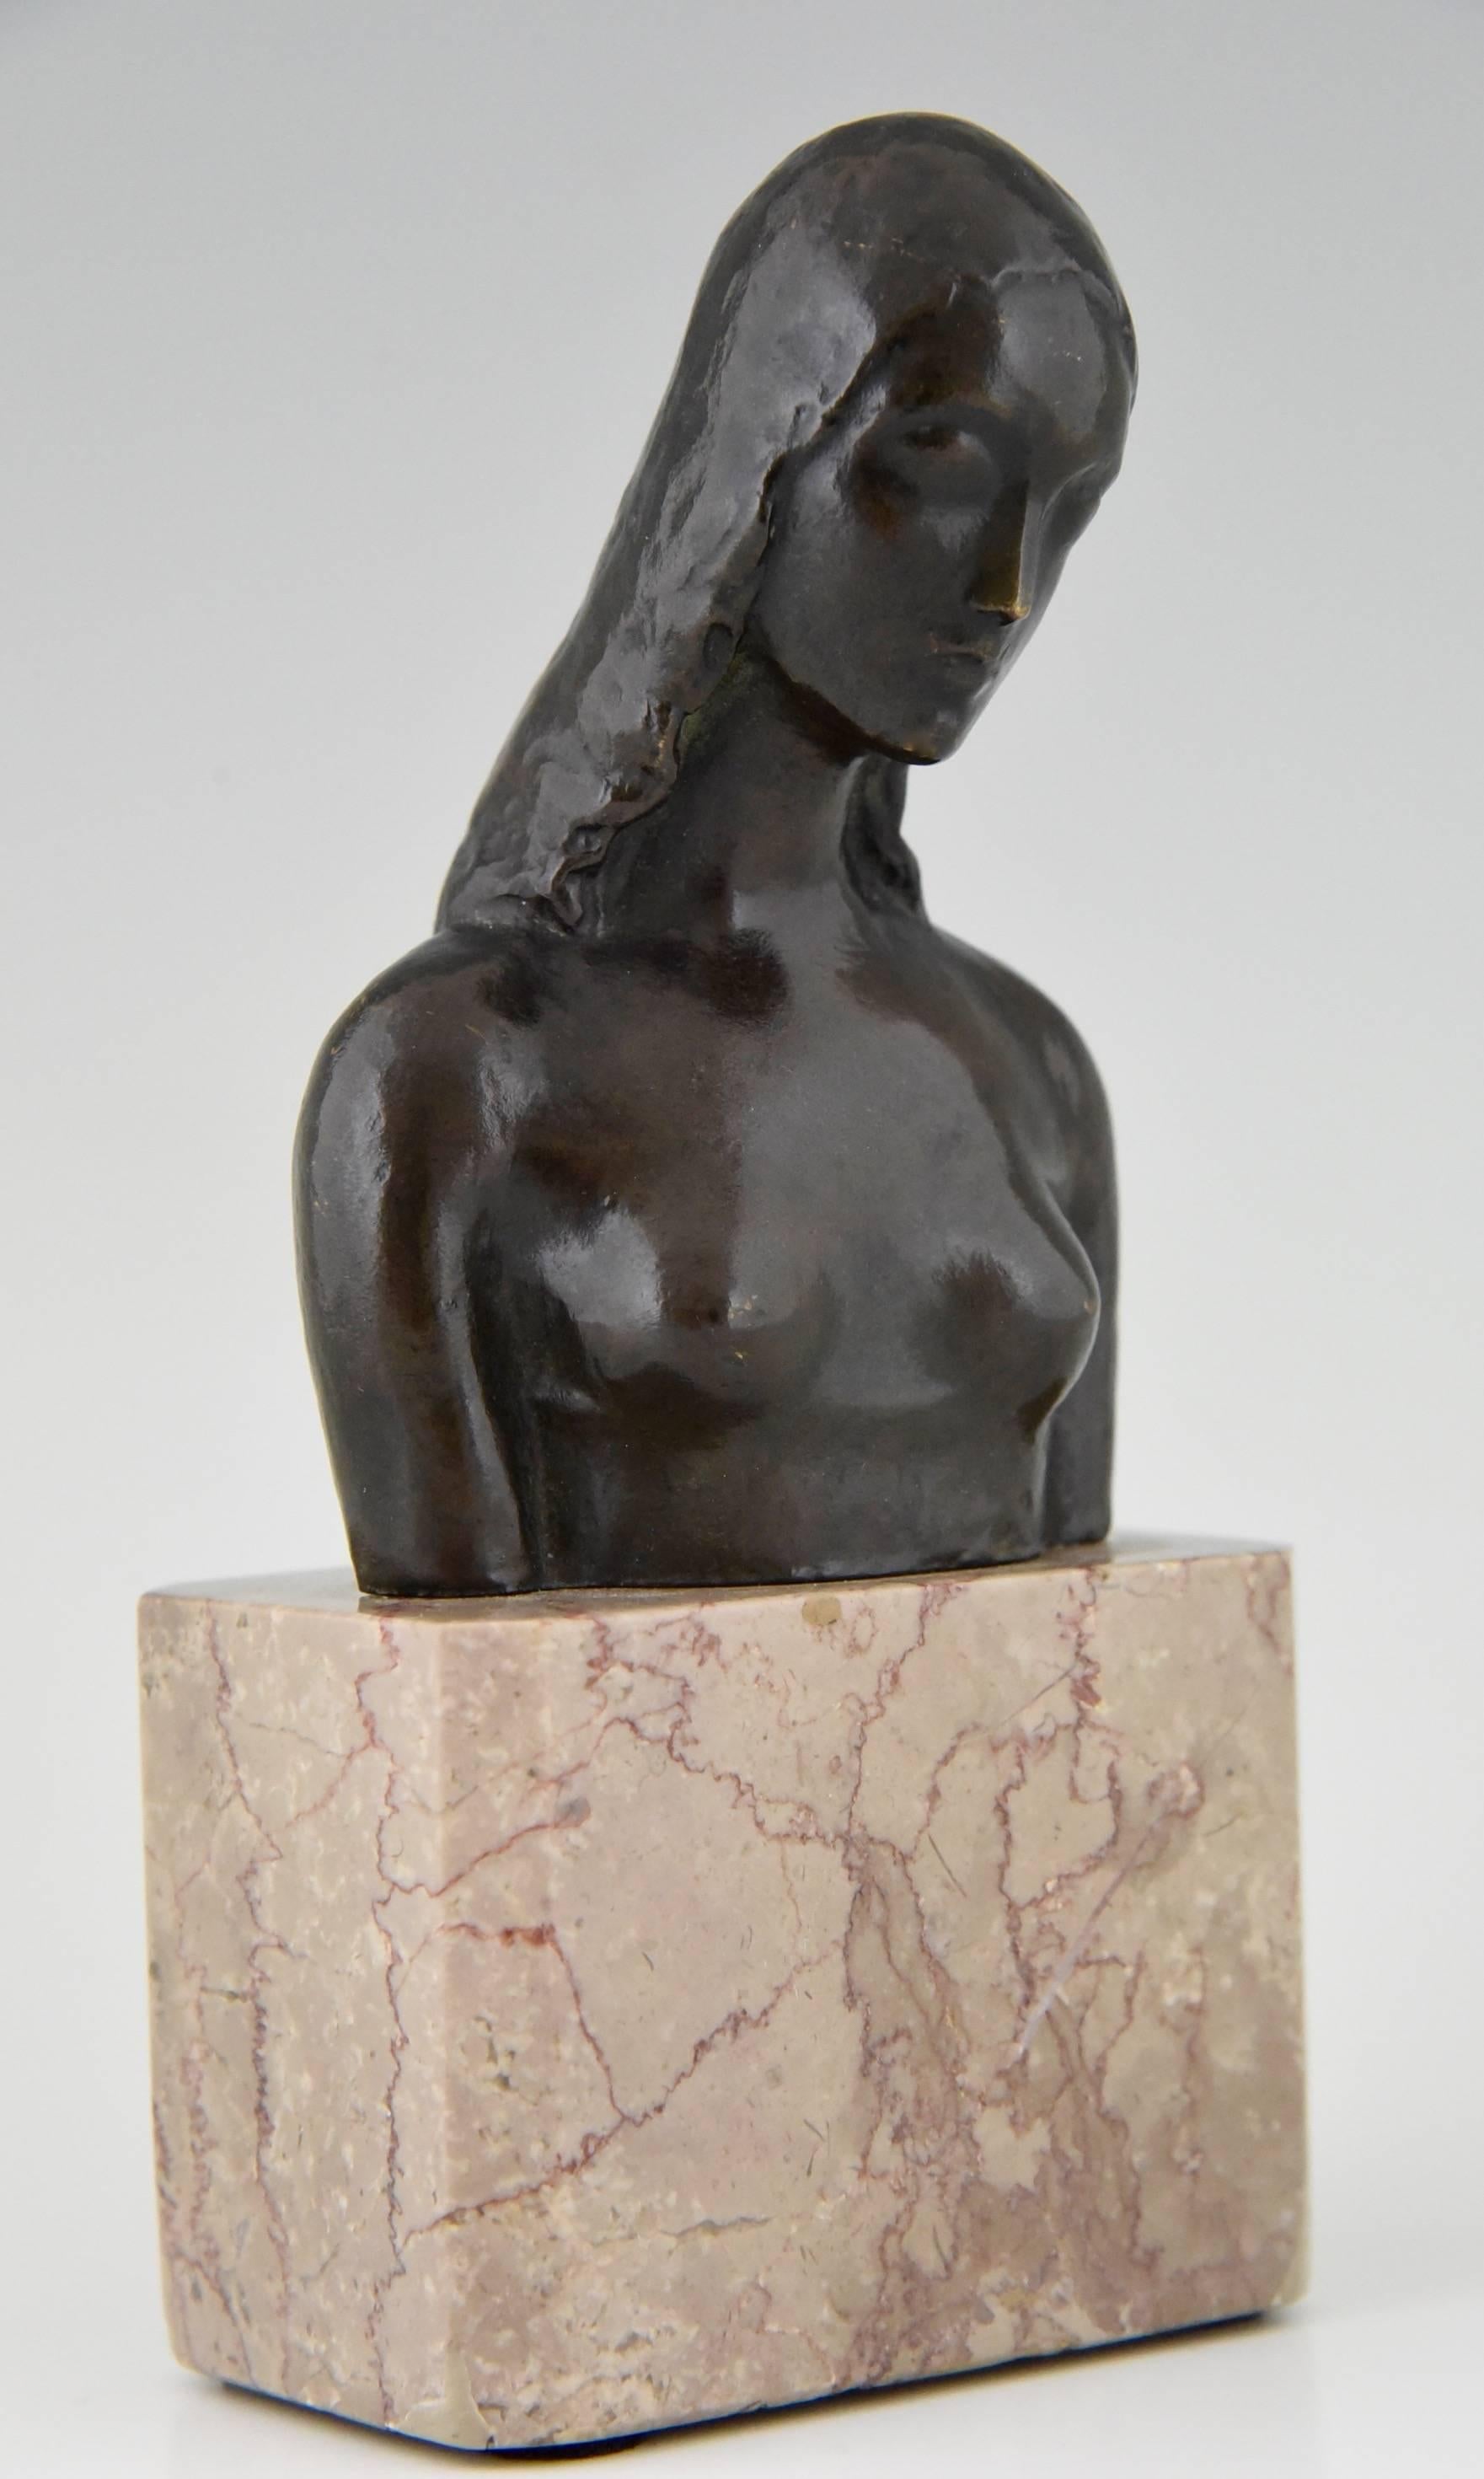 Patinated American Art Deco Bronze Bust of a Female Nude by Simon Moselsio 1930